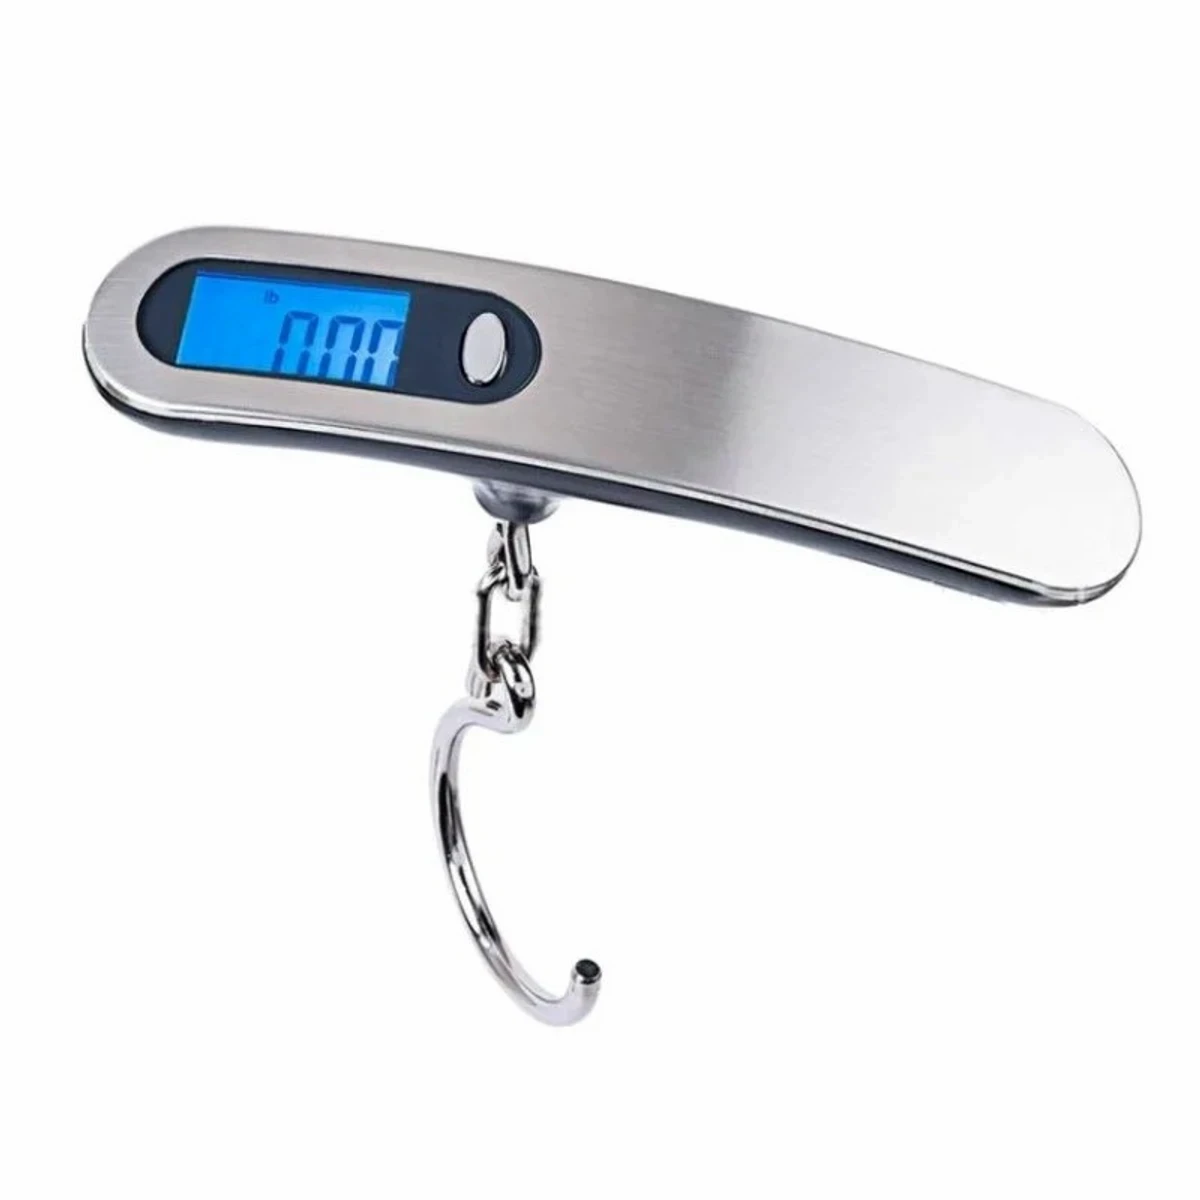 Portable Electronic Hook Scale (0-50kg)